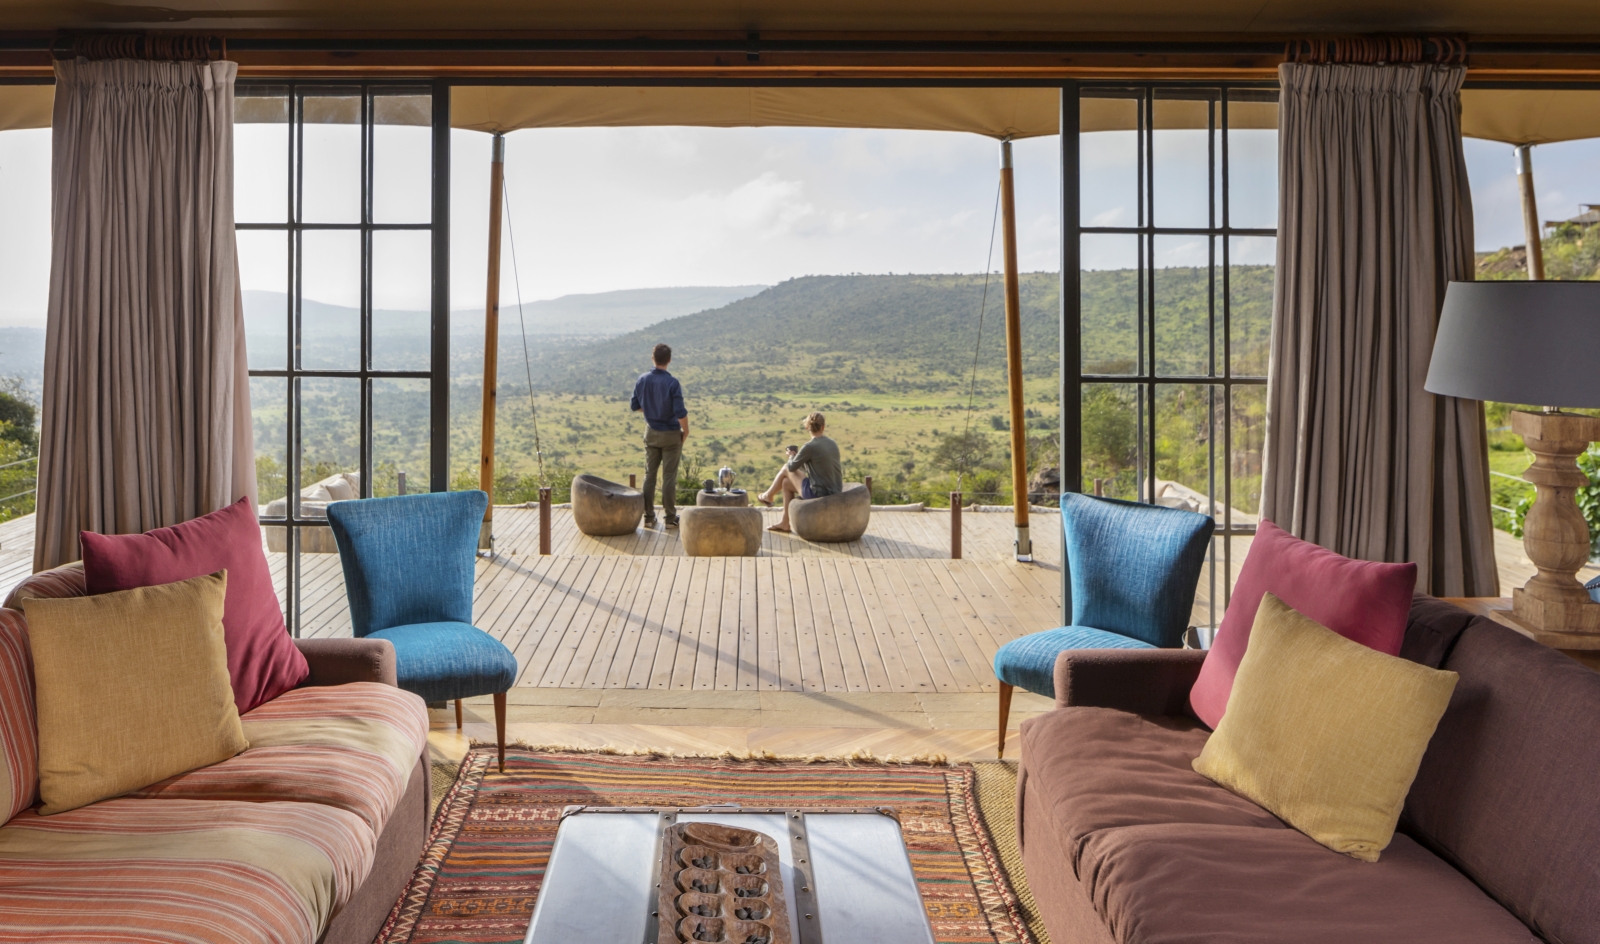 two guests enjoying the view from the main deck outside the lounge at luxury safari lodge Lodo Springs in the Laikipia region of Kenya